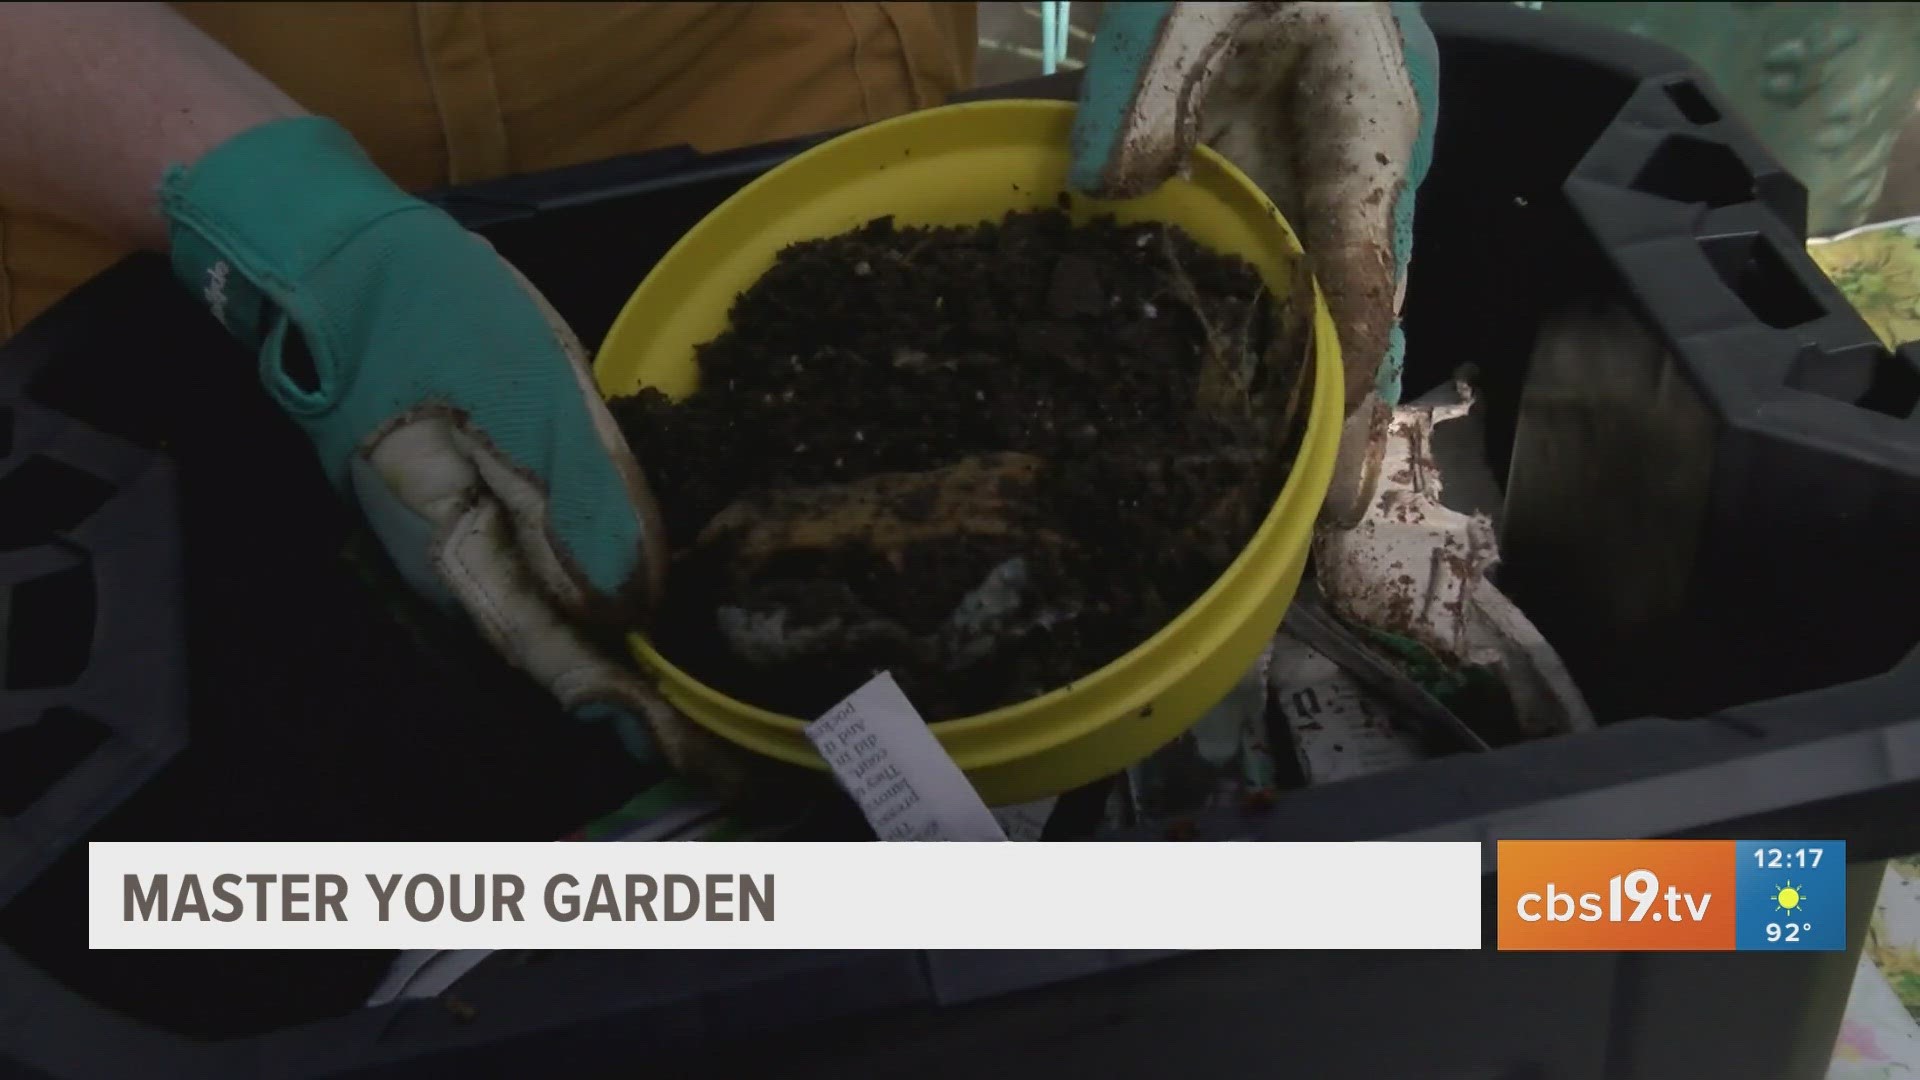 The Smith County Master Gardeners explain vermiculture.